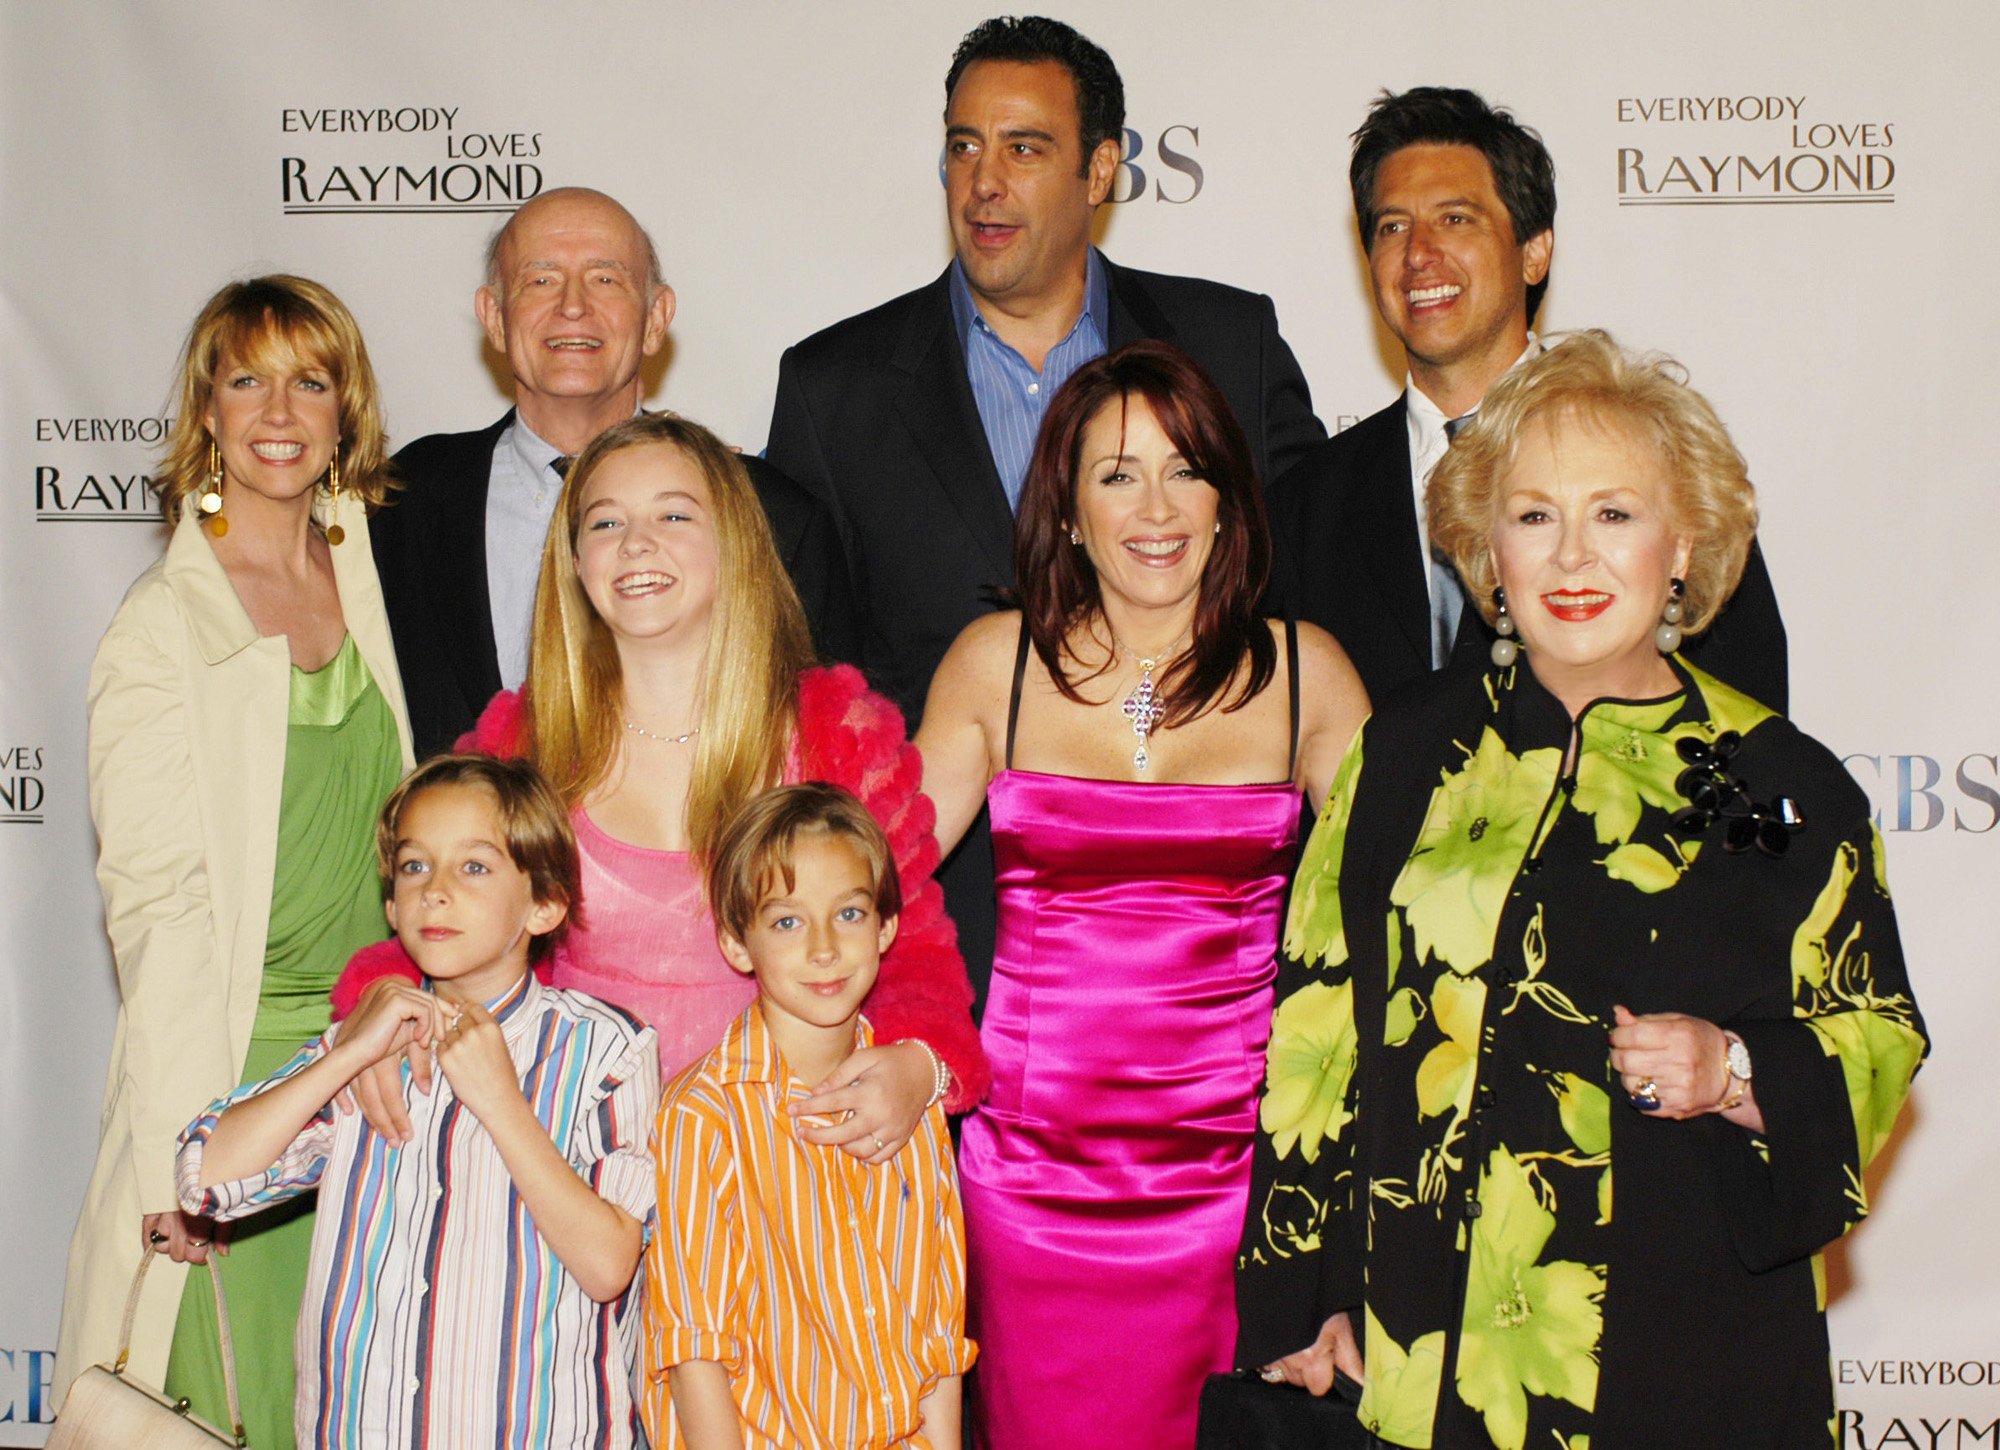 The cast of 'Everybody Loves Raymond' at the cast series wrap party in 2005.